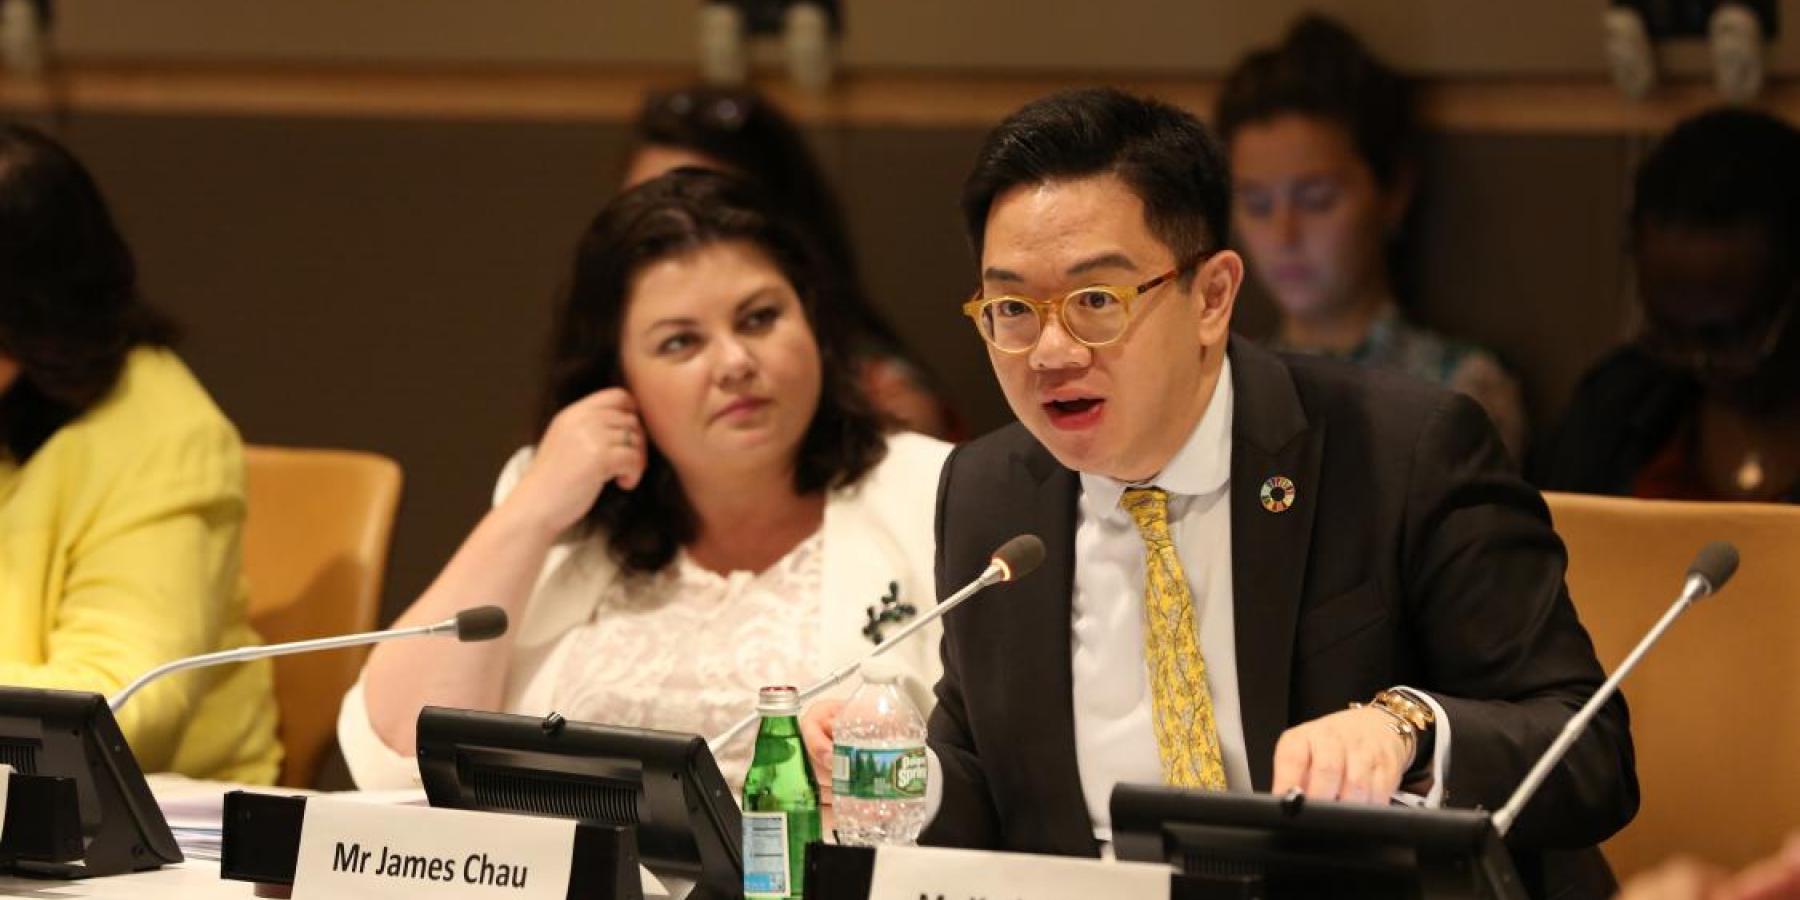 James Chau, WHO Goodwill Ambassador for SDGs and Health, delivered a rousing keynote speech at the interactive hearing for the HLM on NCDs, on 5 July 2018.